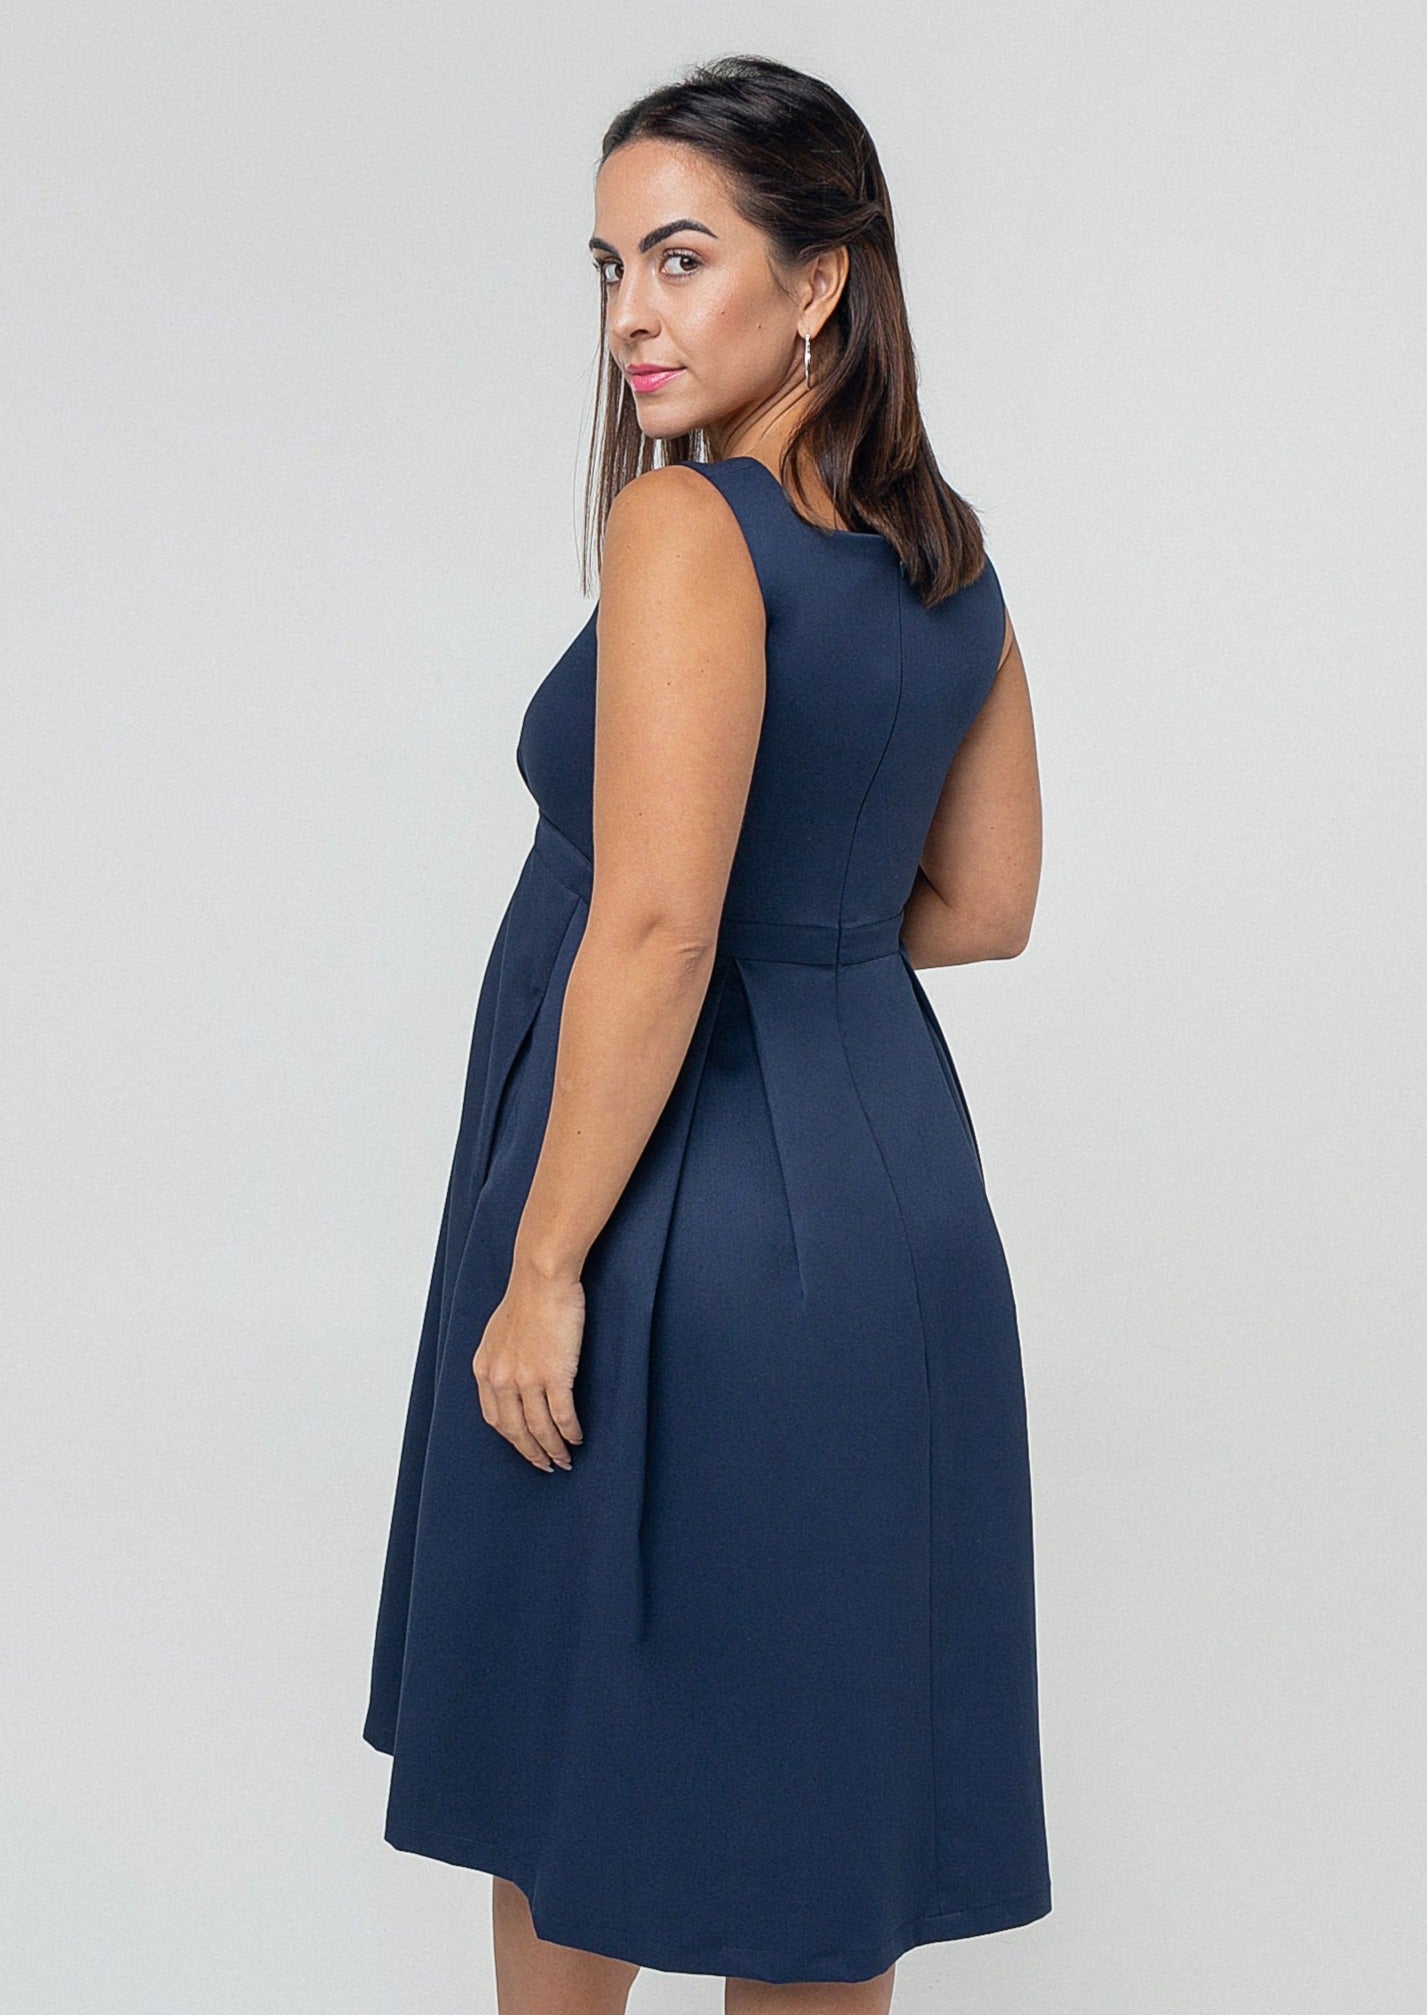 Blue petite maternity dress, nursing dresses, fancy style with empire waist, pockets, and designer breastfeeding access. Made with luxury navy Italian fabric, washable, sustainable.